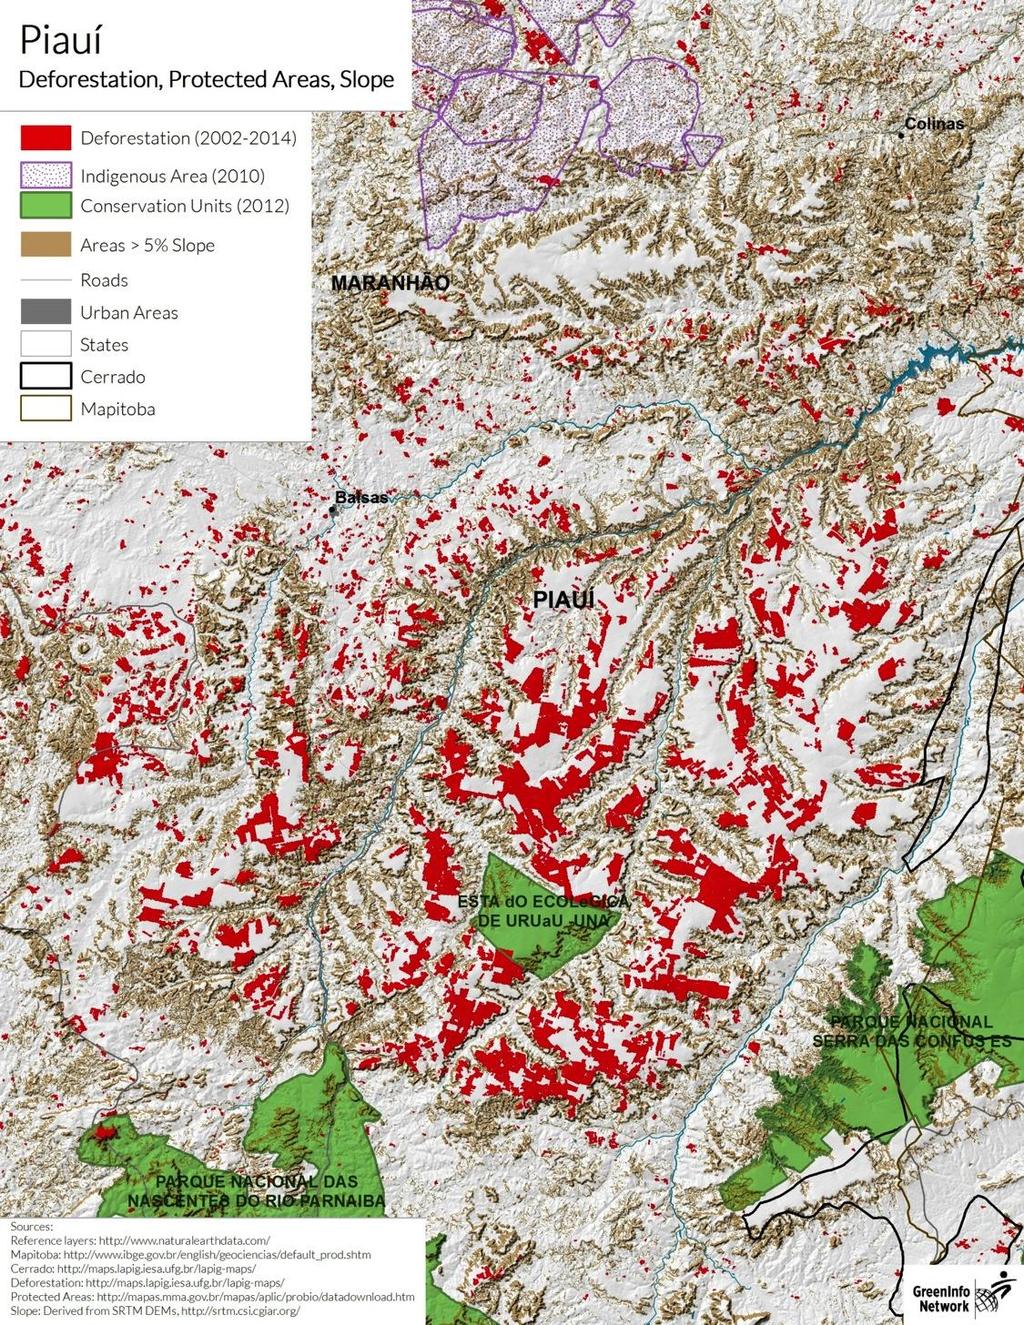 Generally, fires are most common in the areas experiencing high deforestation, though burned area is very high in the northwest boundary of the Cerrado, even though the deforestation